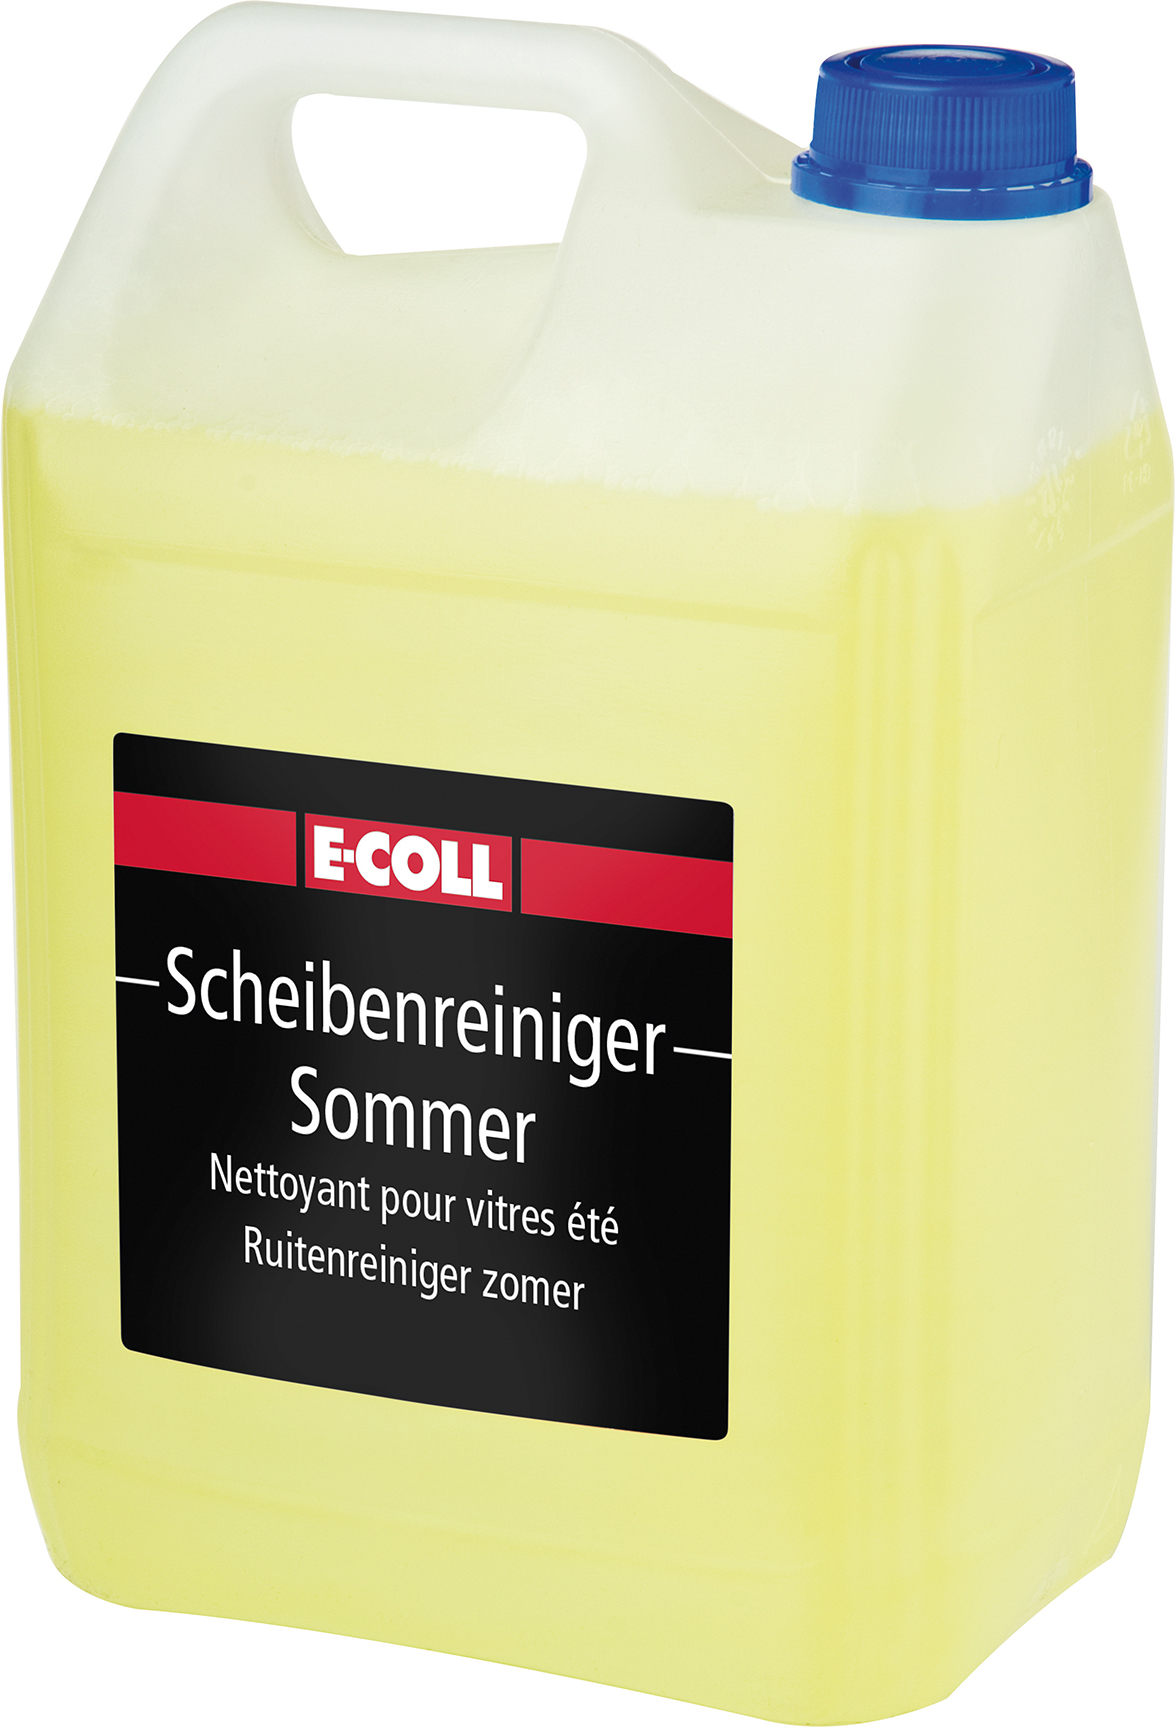 Picture of Scheibenreiniger Sommer 5L Kanister E-COLL